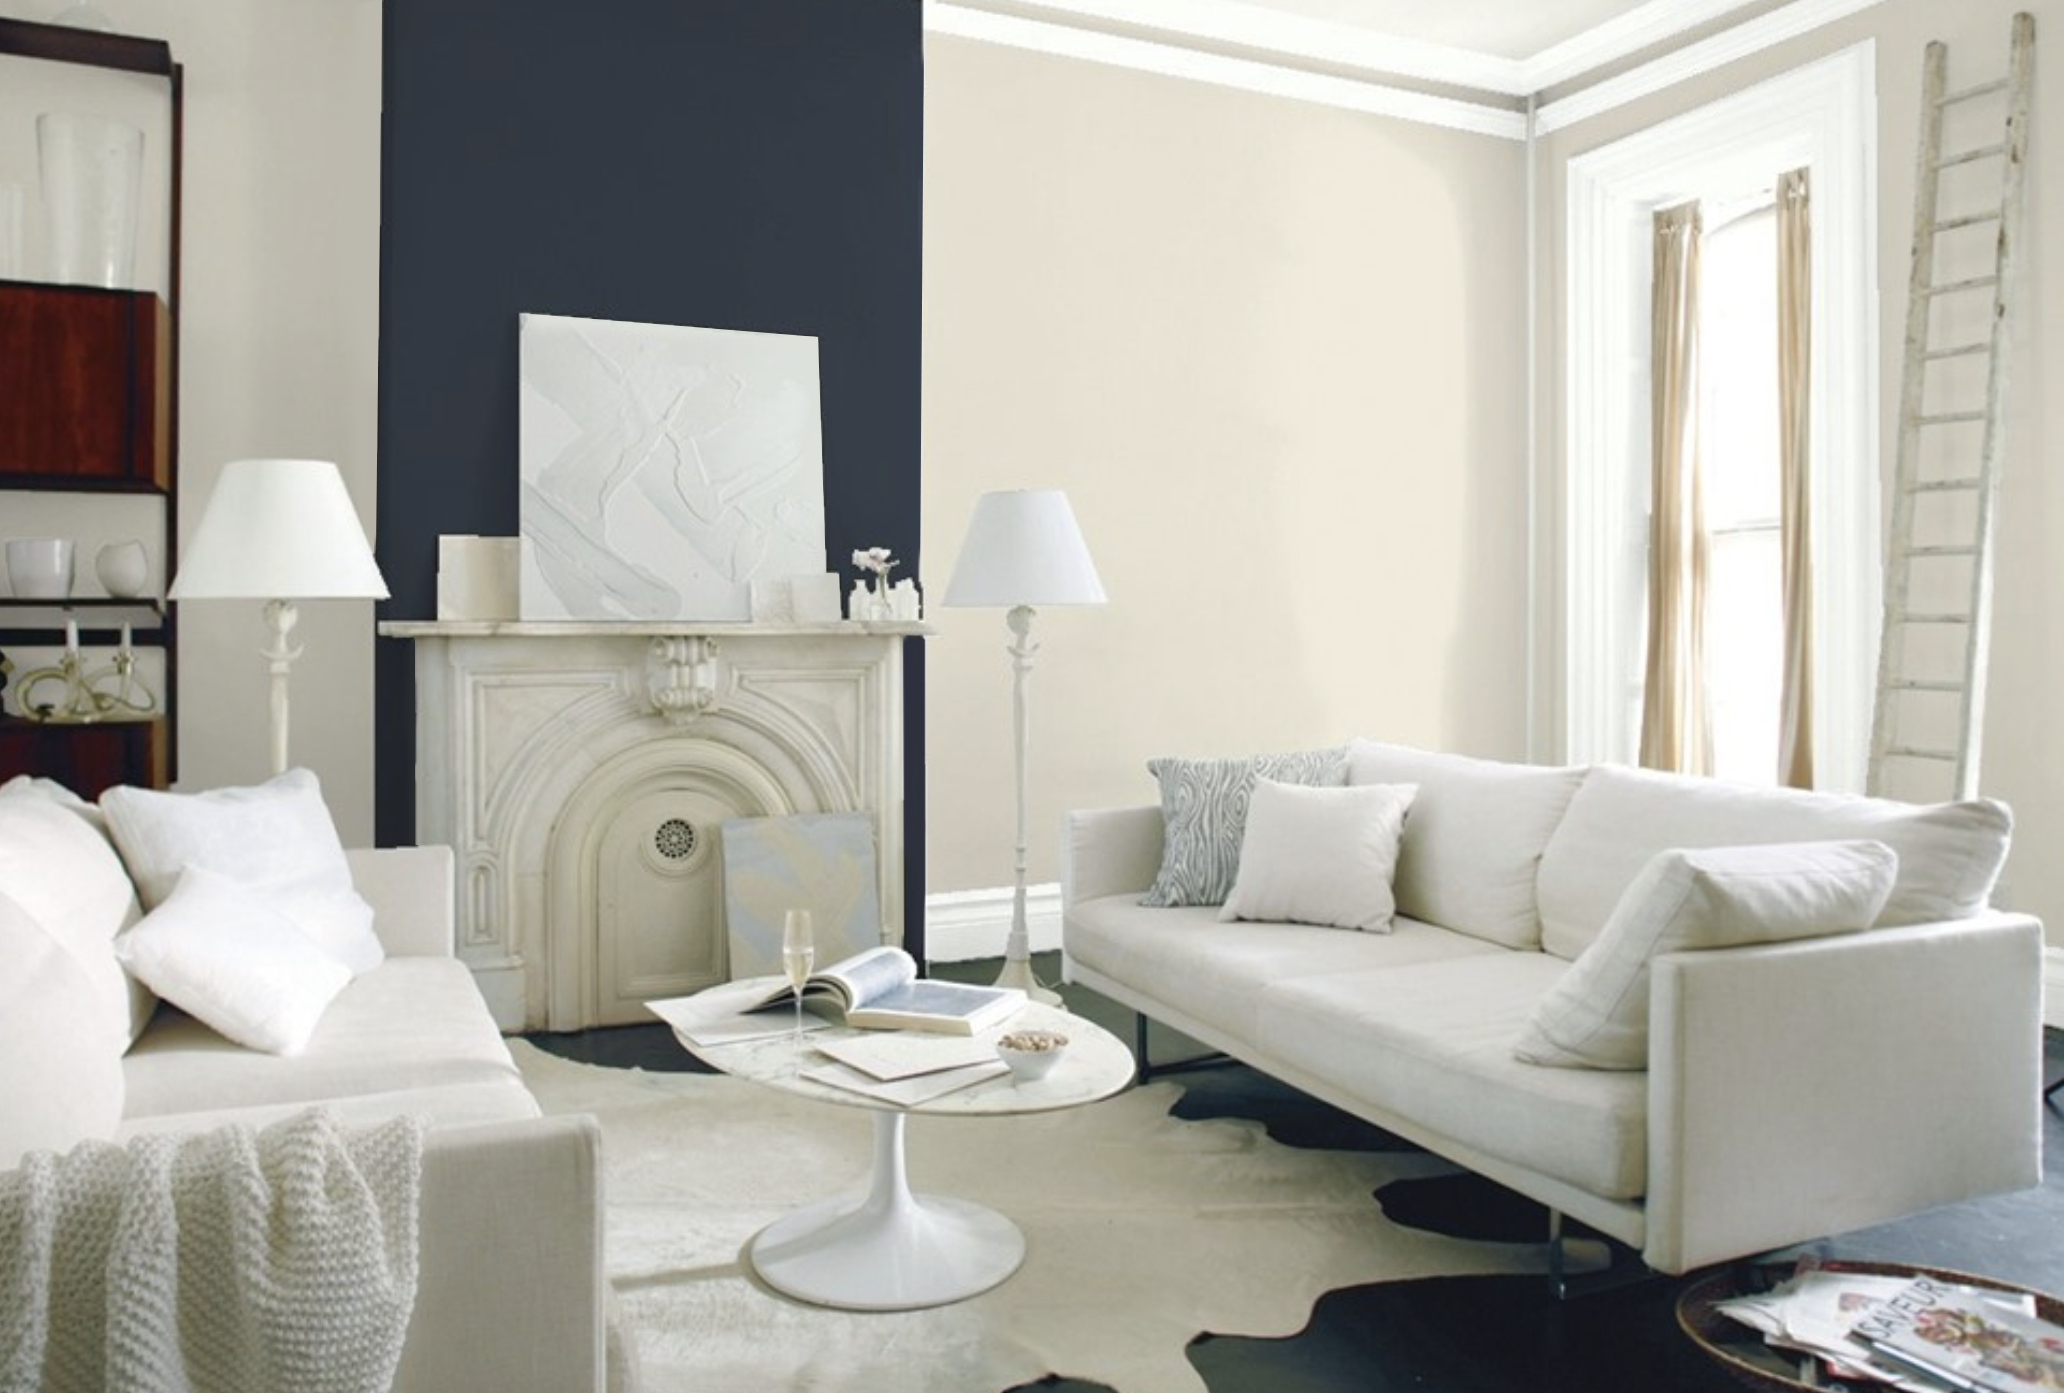 Benjamin Moore Ballet White modern living room with Hale Navy accent